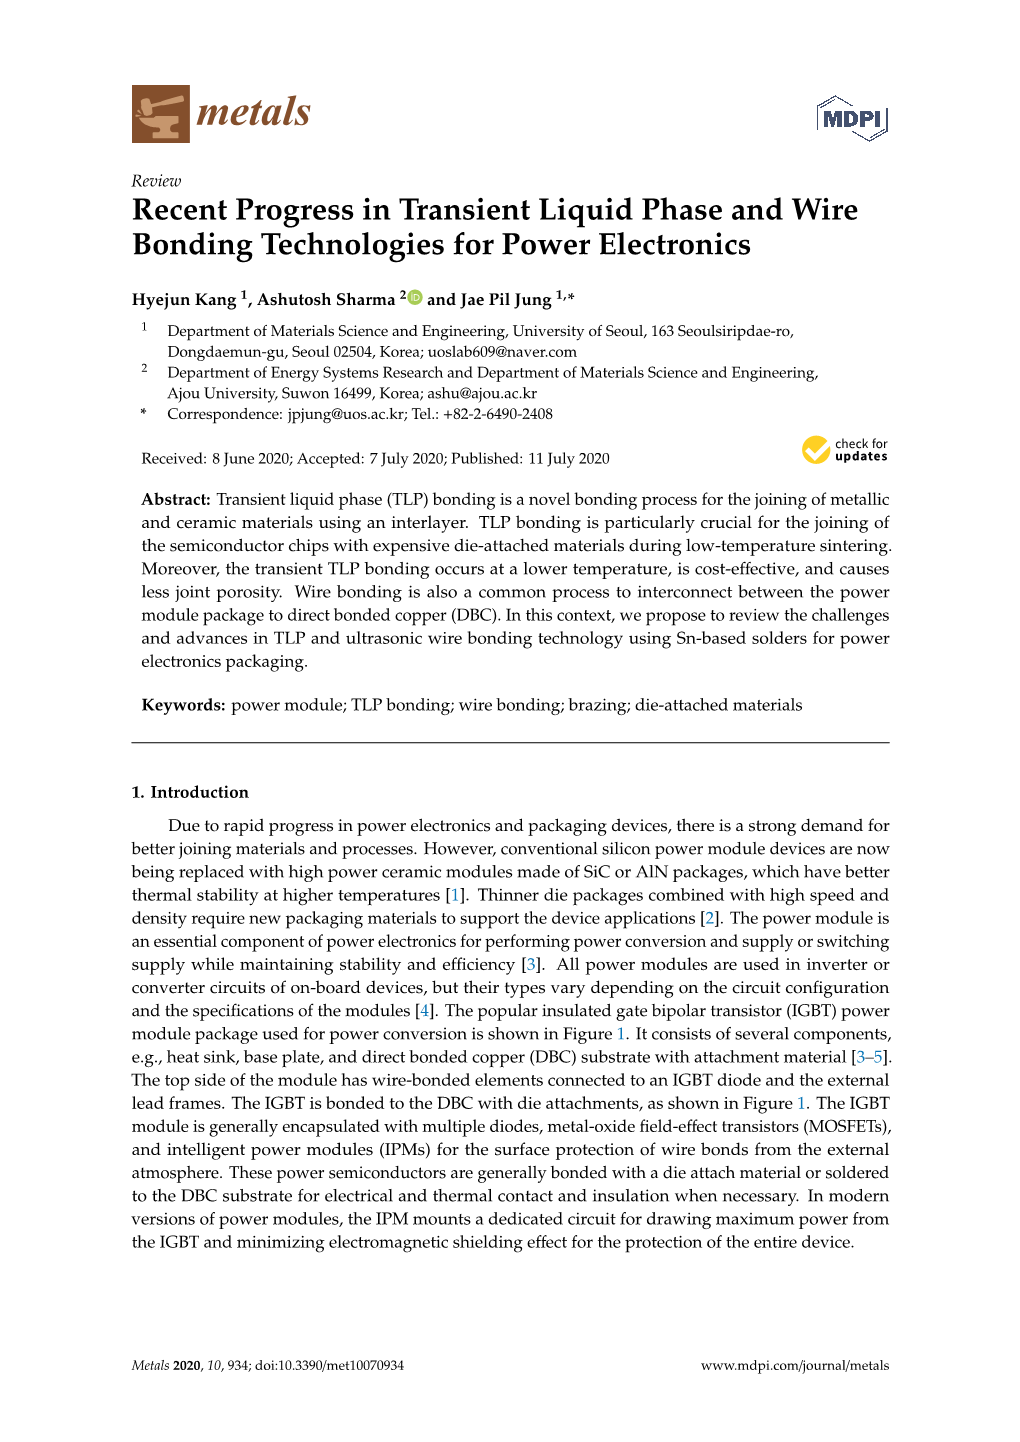 Recent Progress in Transient Liquid Phase and Wire Bonding Technologies for Power Electronics